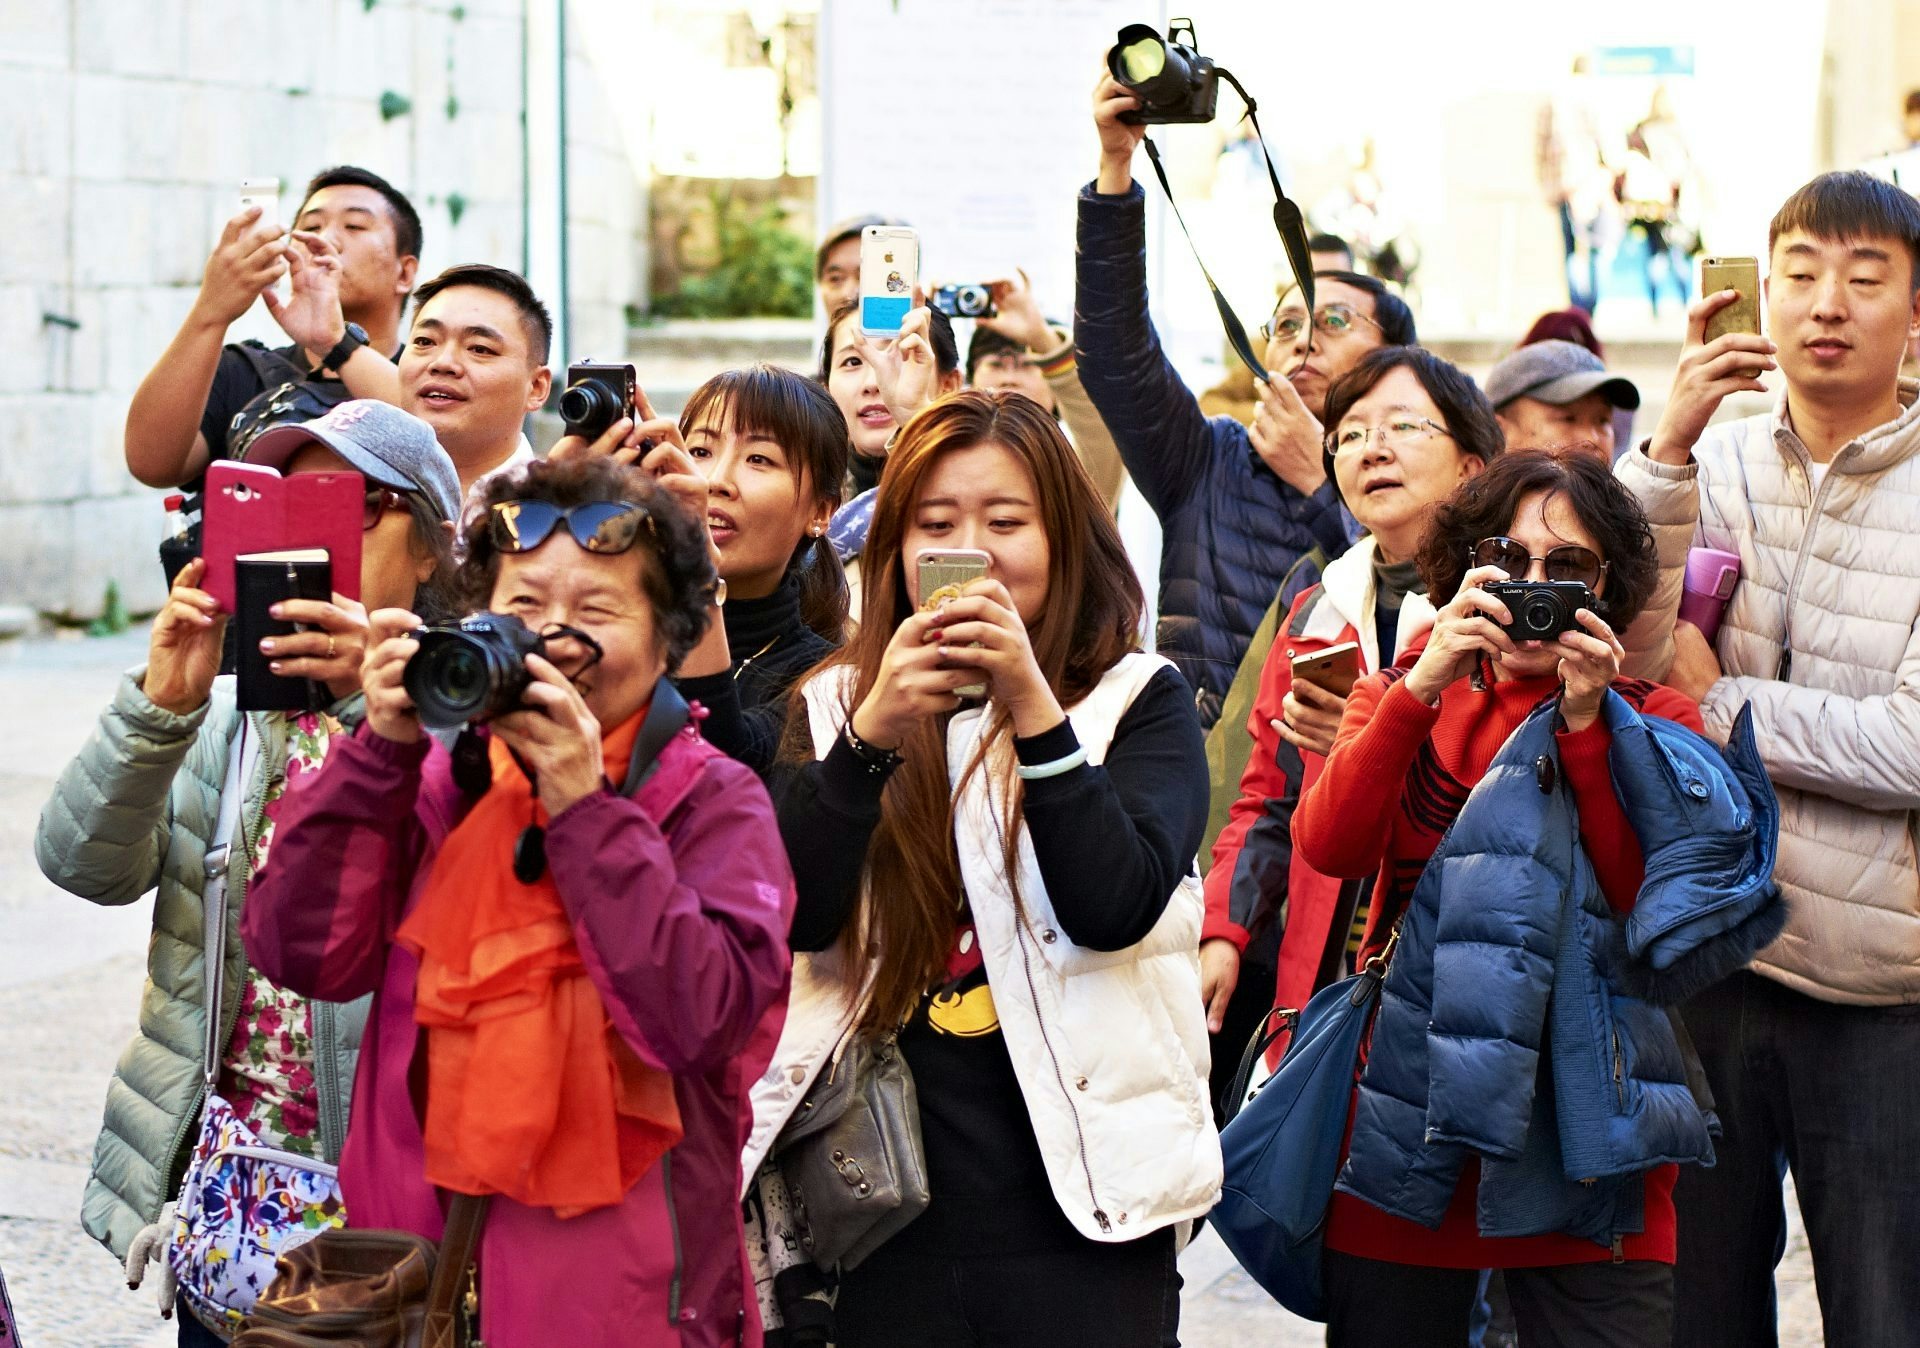 The report found that respondents in half of the countries surveyed had seen an improvement in the behavior of Chinese tourists. (Kike Fernandez/Shutterstock)